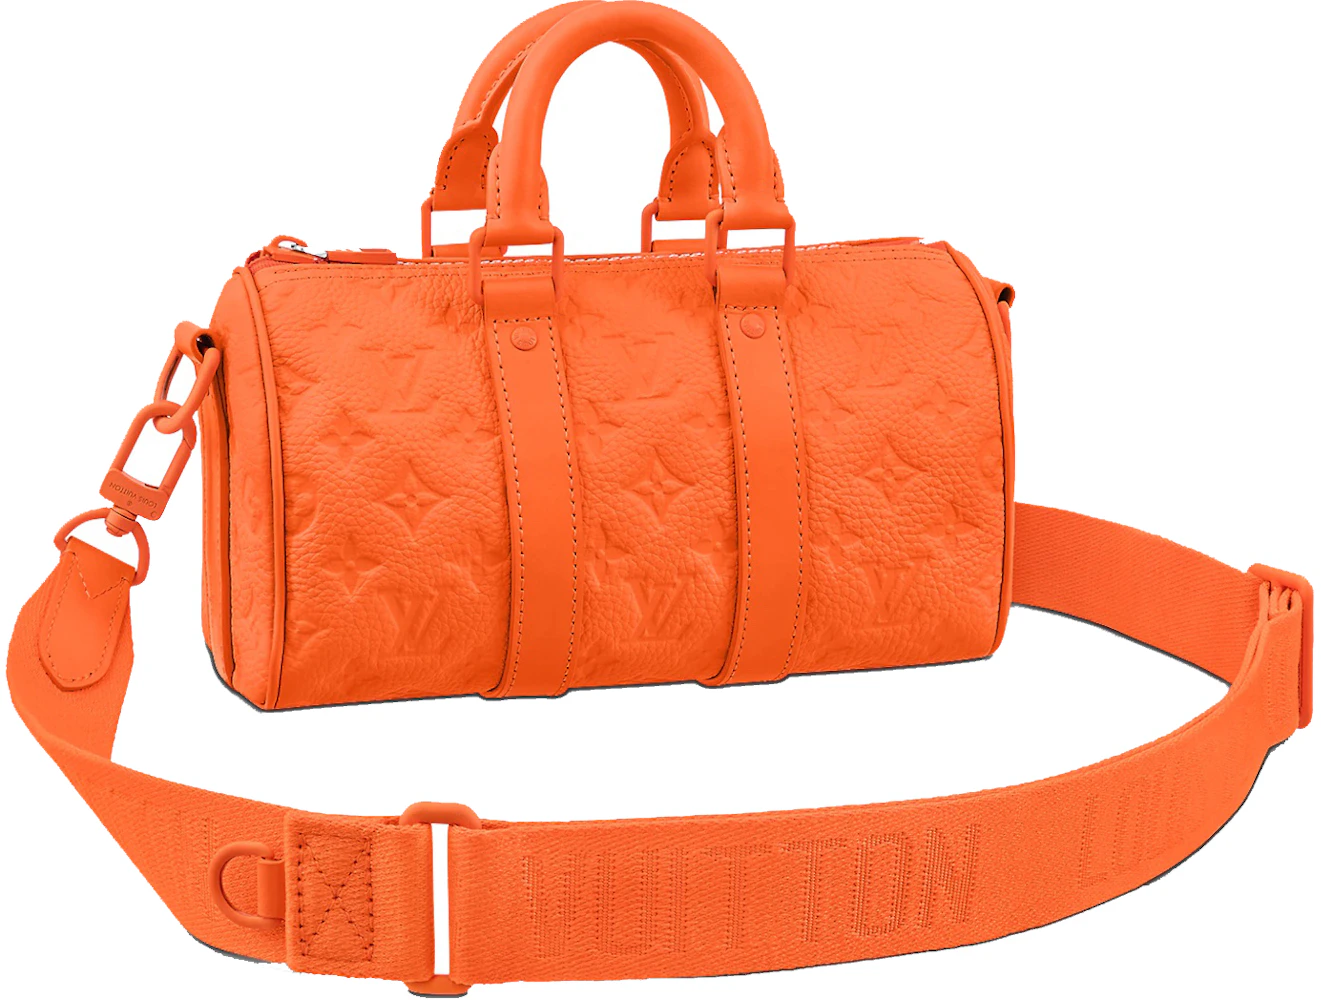 Exotic Appeal in Louis Vuitton's City Keepall Bag